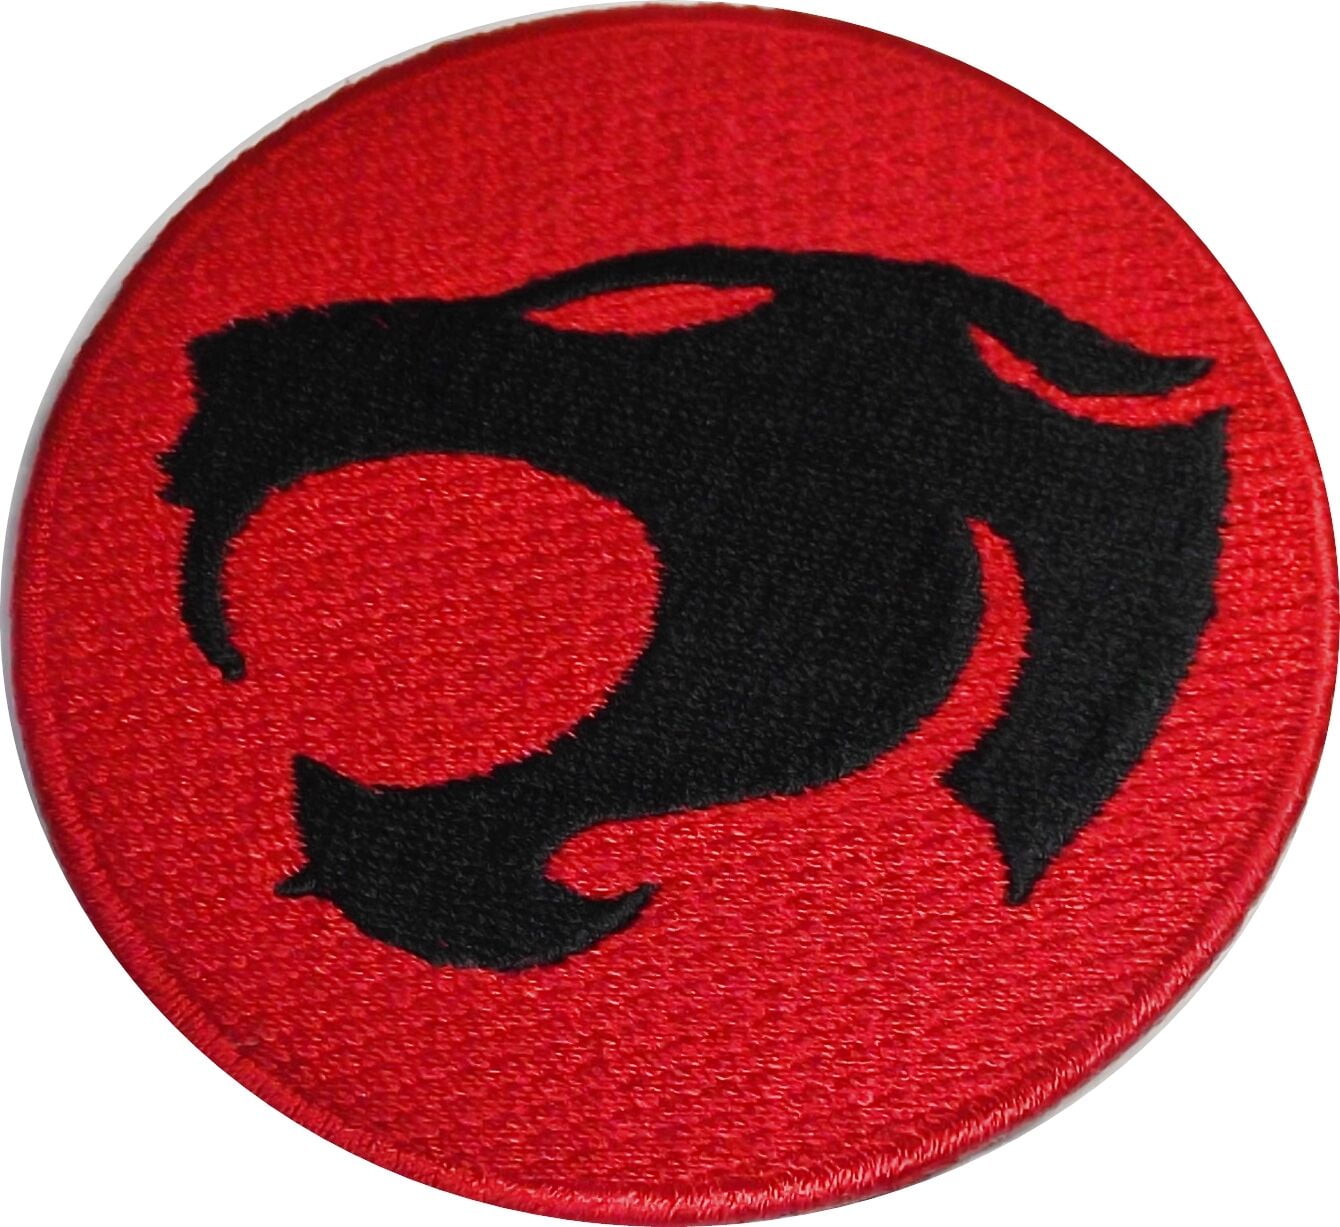 Thundercats Red Cat Logo 2 3/4 Diameter Embroidered Patch - Walmart.com